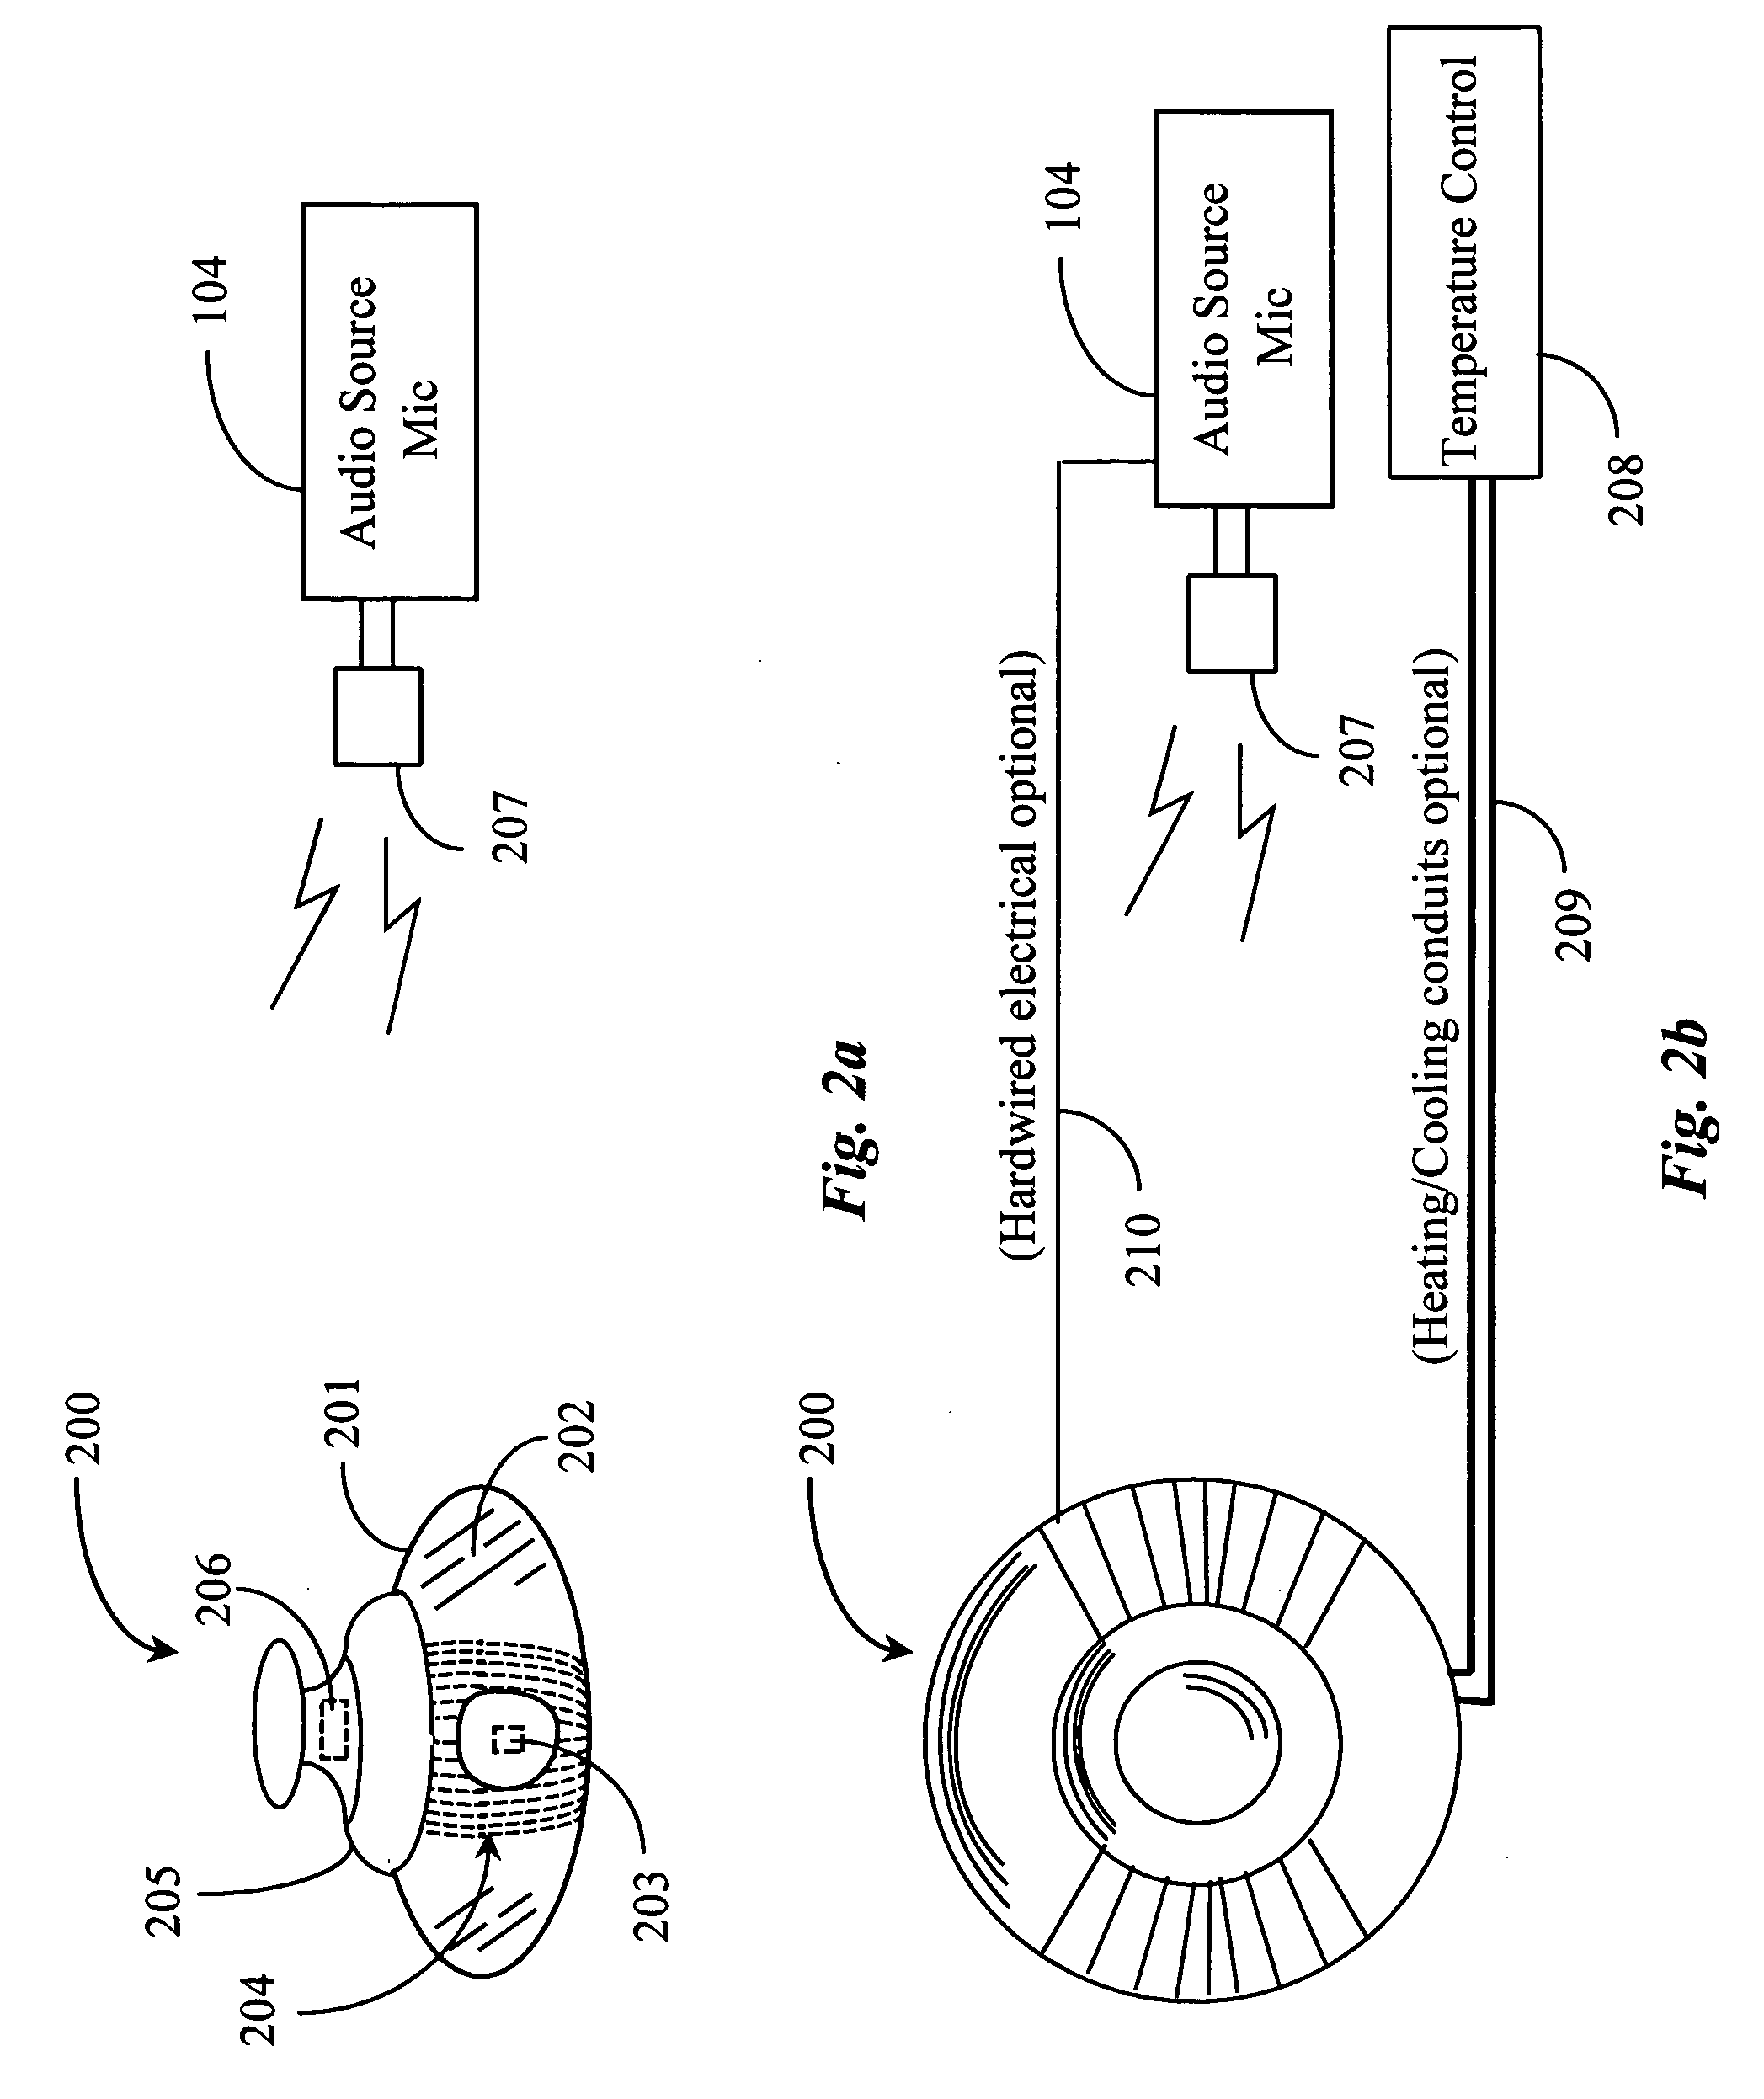 Massage device utilizing an unanchored magnet for primary force generation